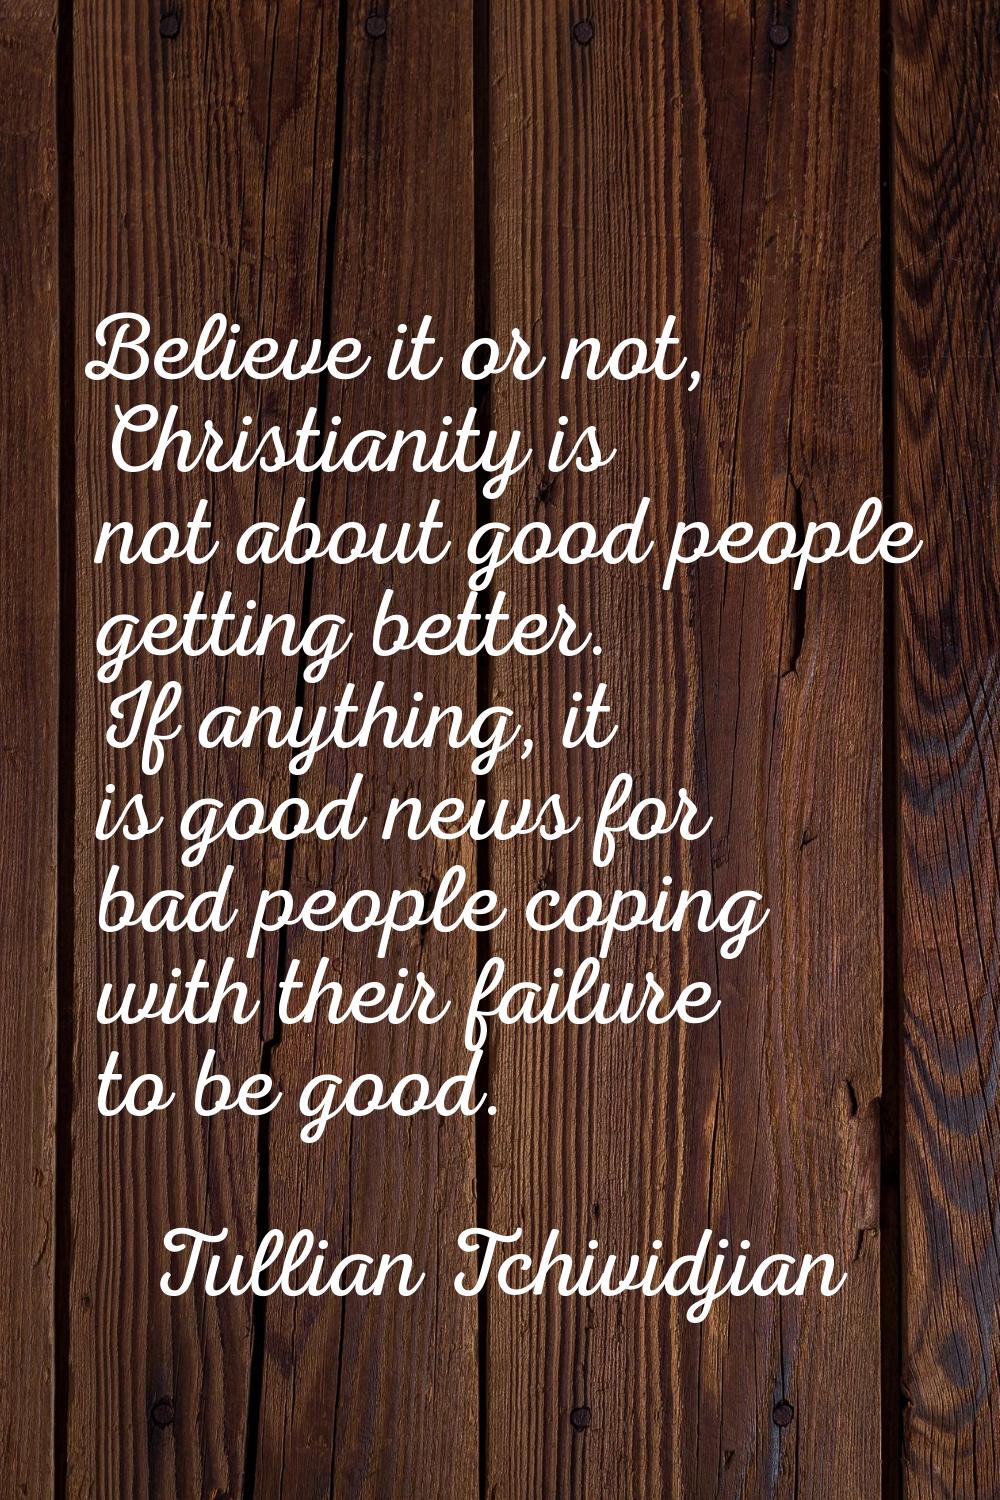 Believe it or not, Christianity is not about good people getting better. If anything, it is good ne